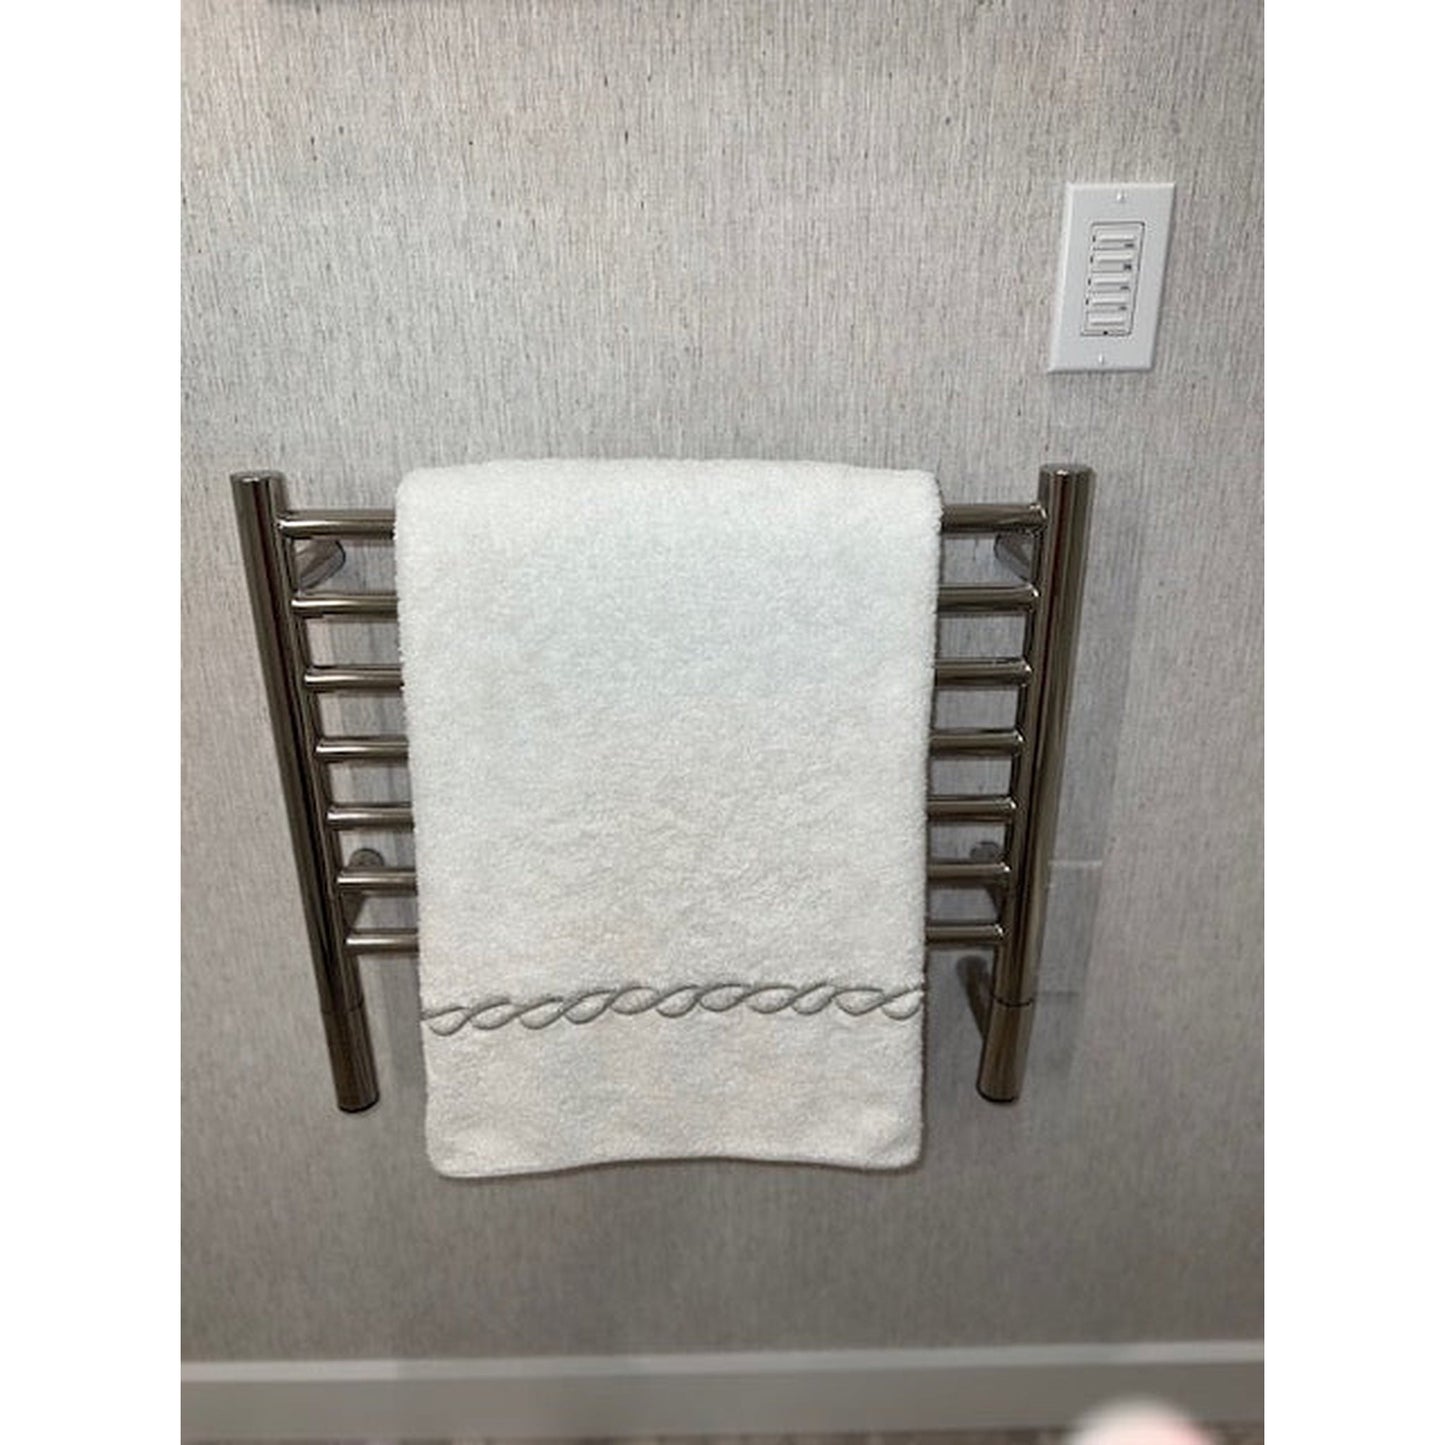 Amba Jeeves H Straight 7-Bar Brushed Stainless Steel Finish Hardwired Towel Warmer